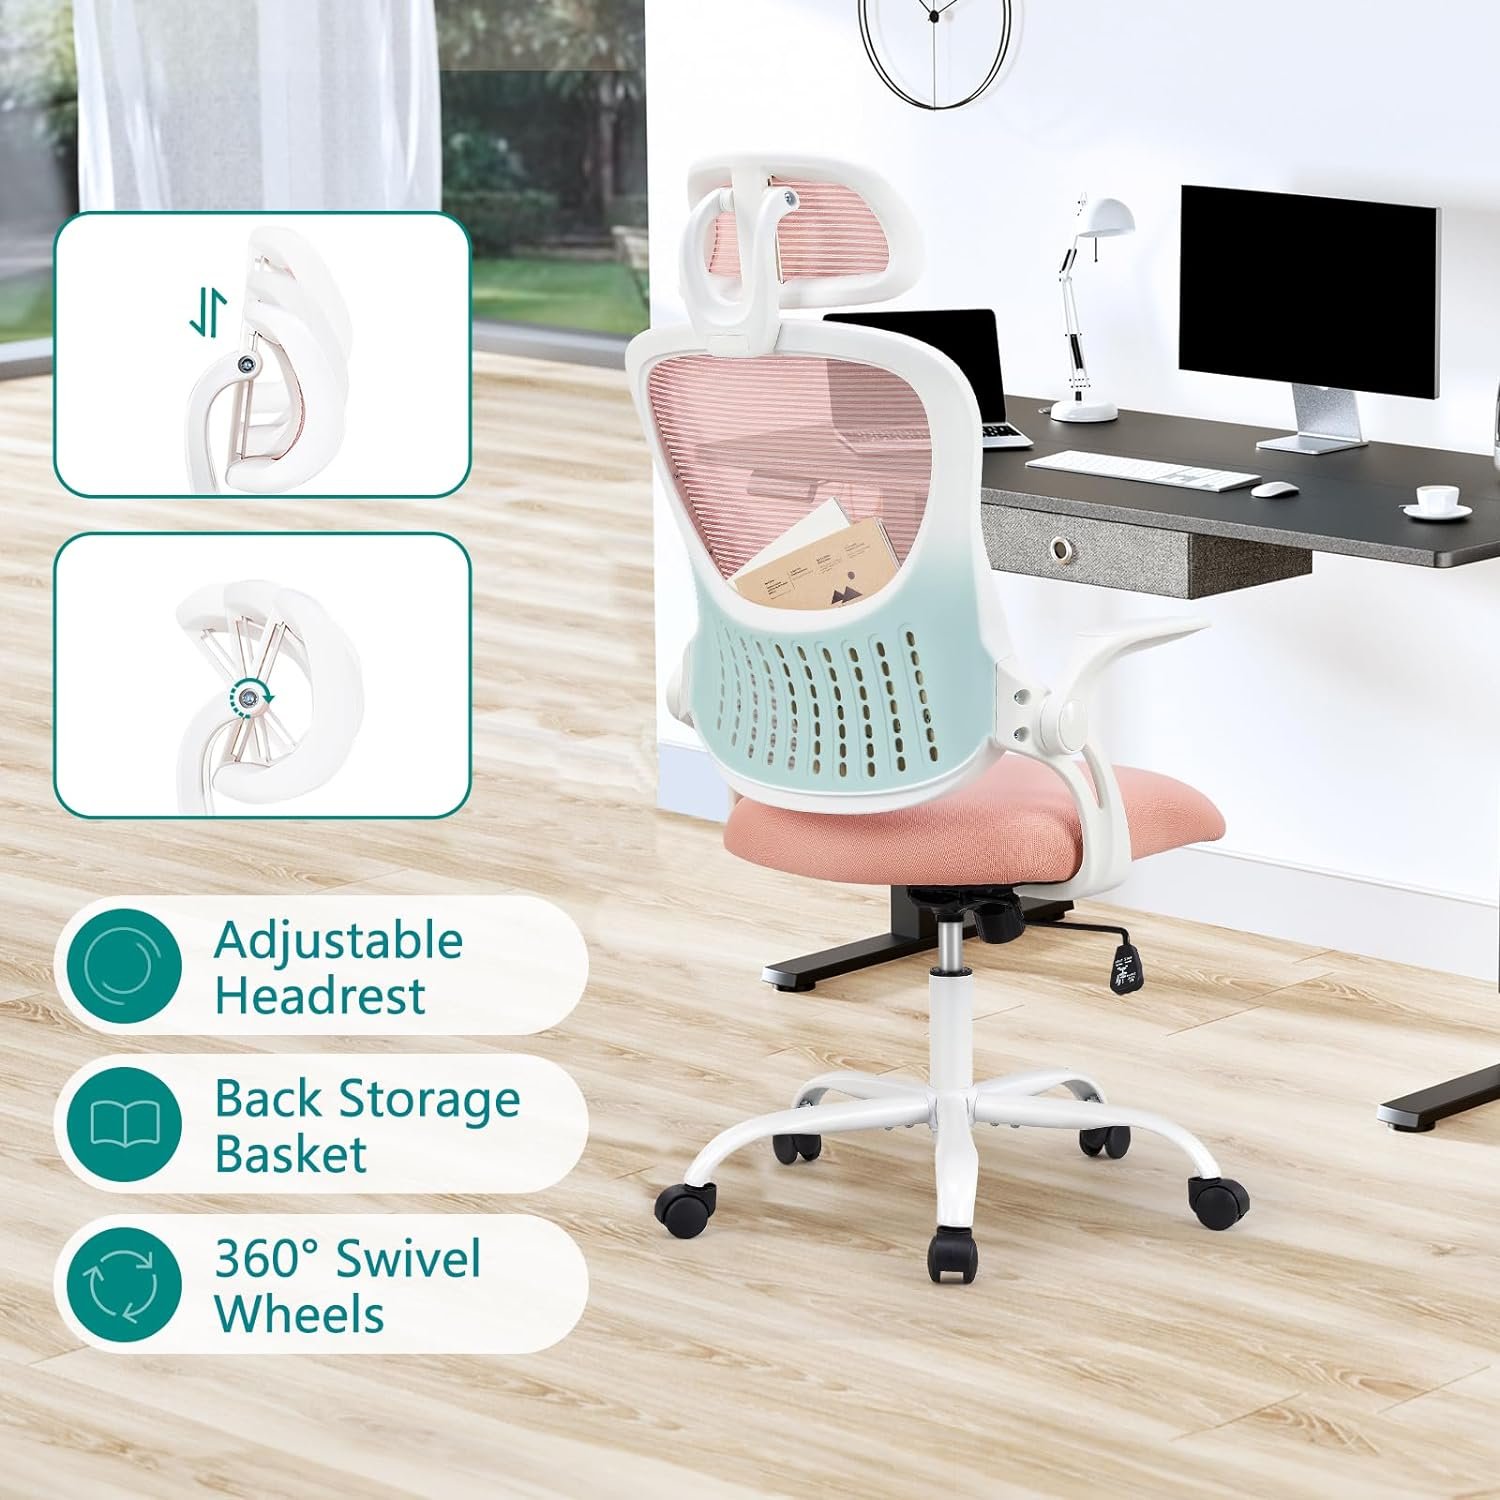 Office Desk Computer Chair, Ergonomic High Back Comfy Swivel Gaming Home Mesh Chairs with Wheels, Lumbar Support, Adjustable Headrest, Comfortable Pillow,Soft Arms,120°tilt for Bedroom,Study,Grey